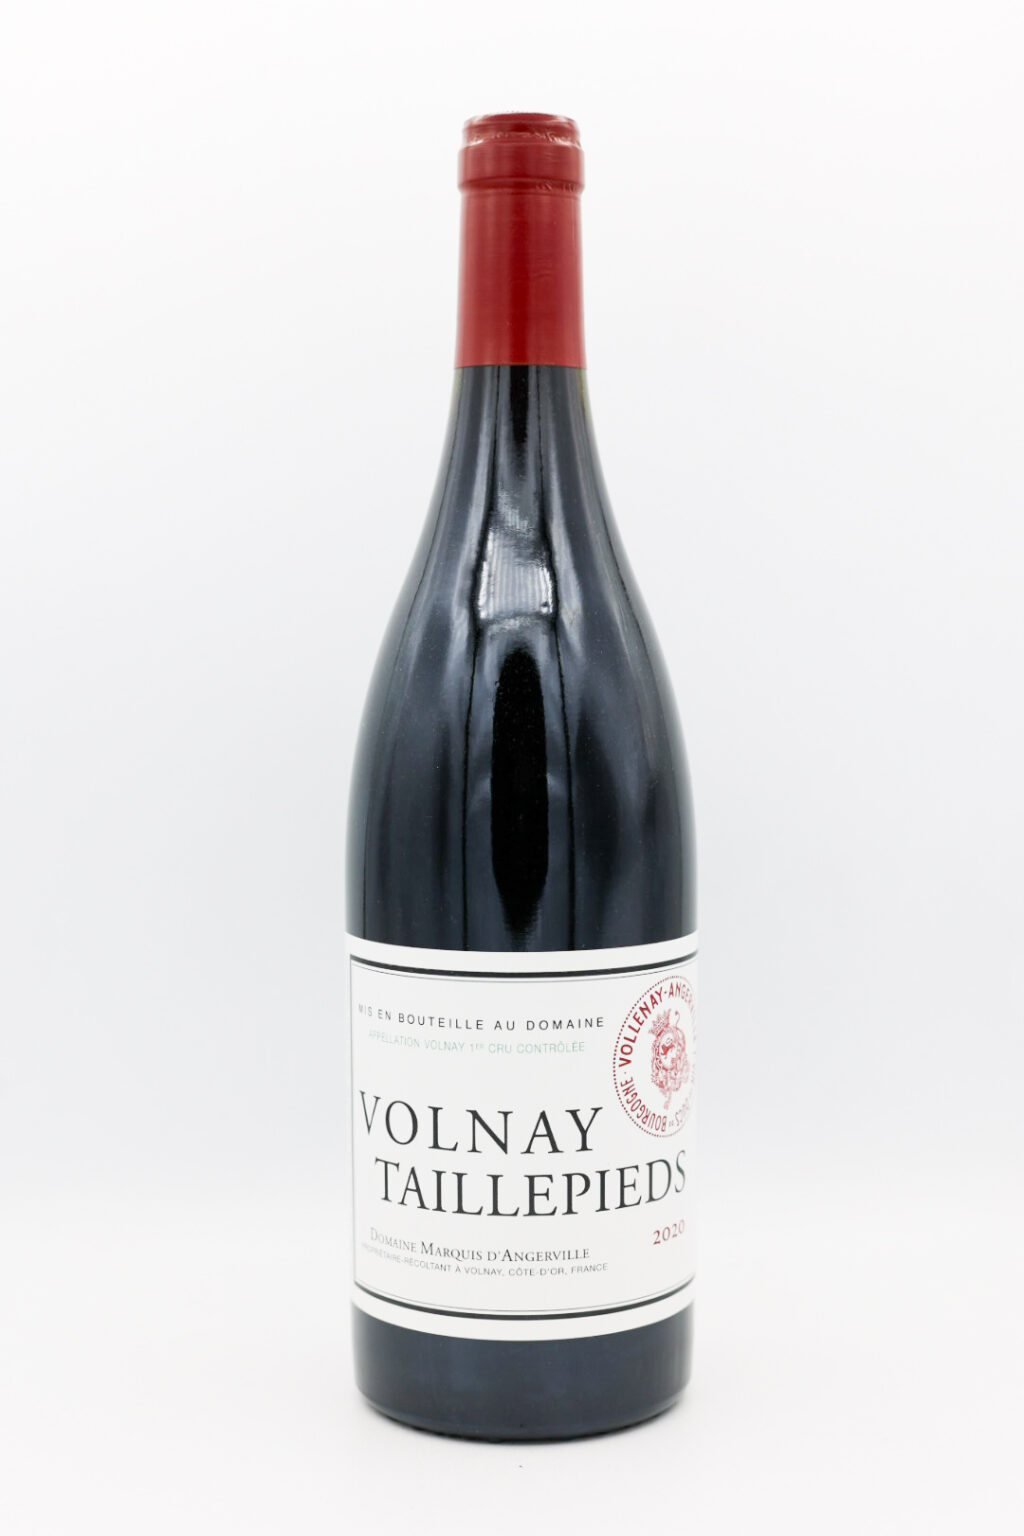 Domaine Marquis d’Angerville Volnay 1er Cru Taillepieds 2020